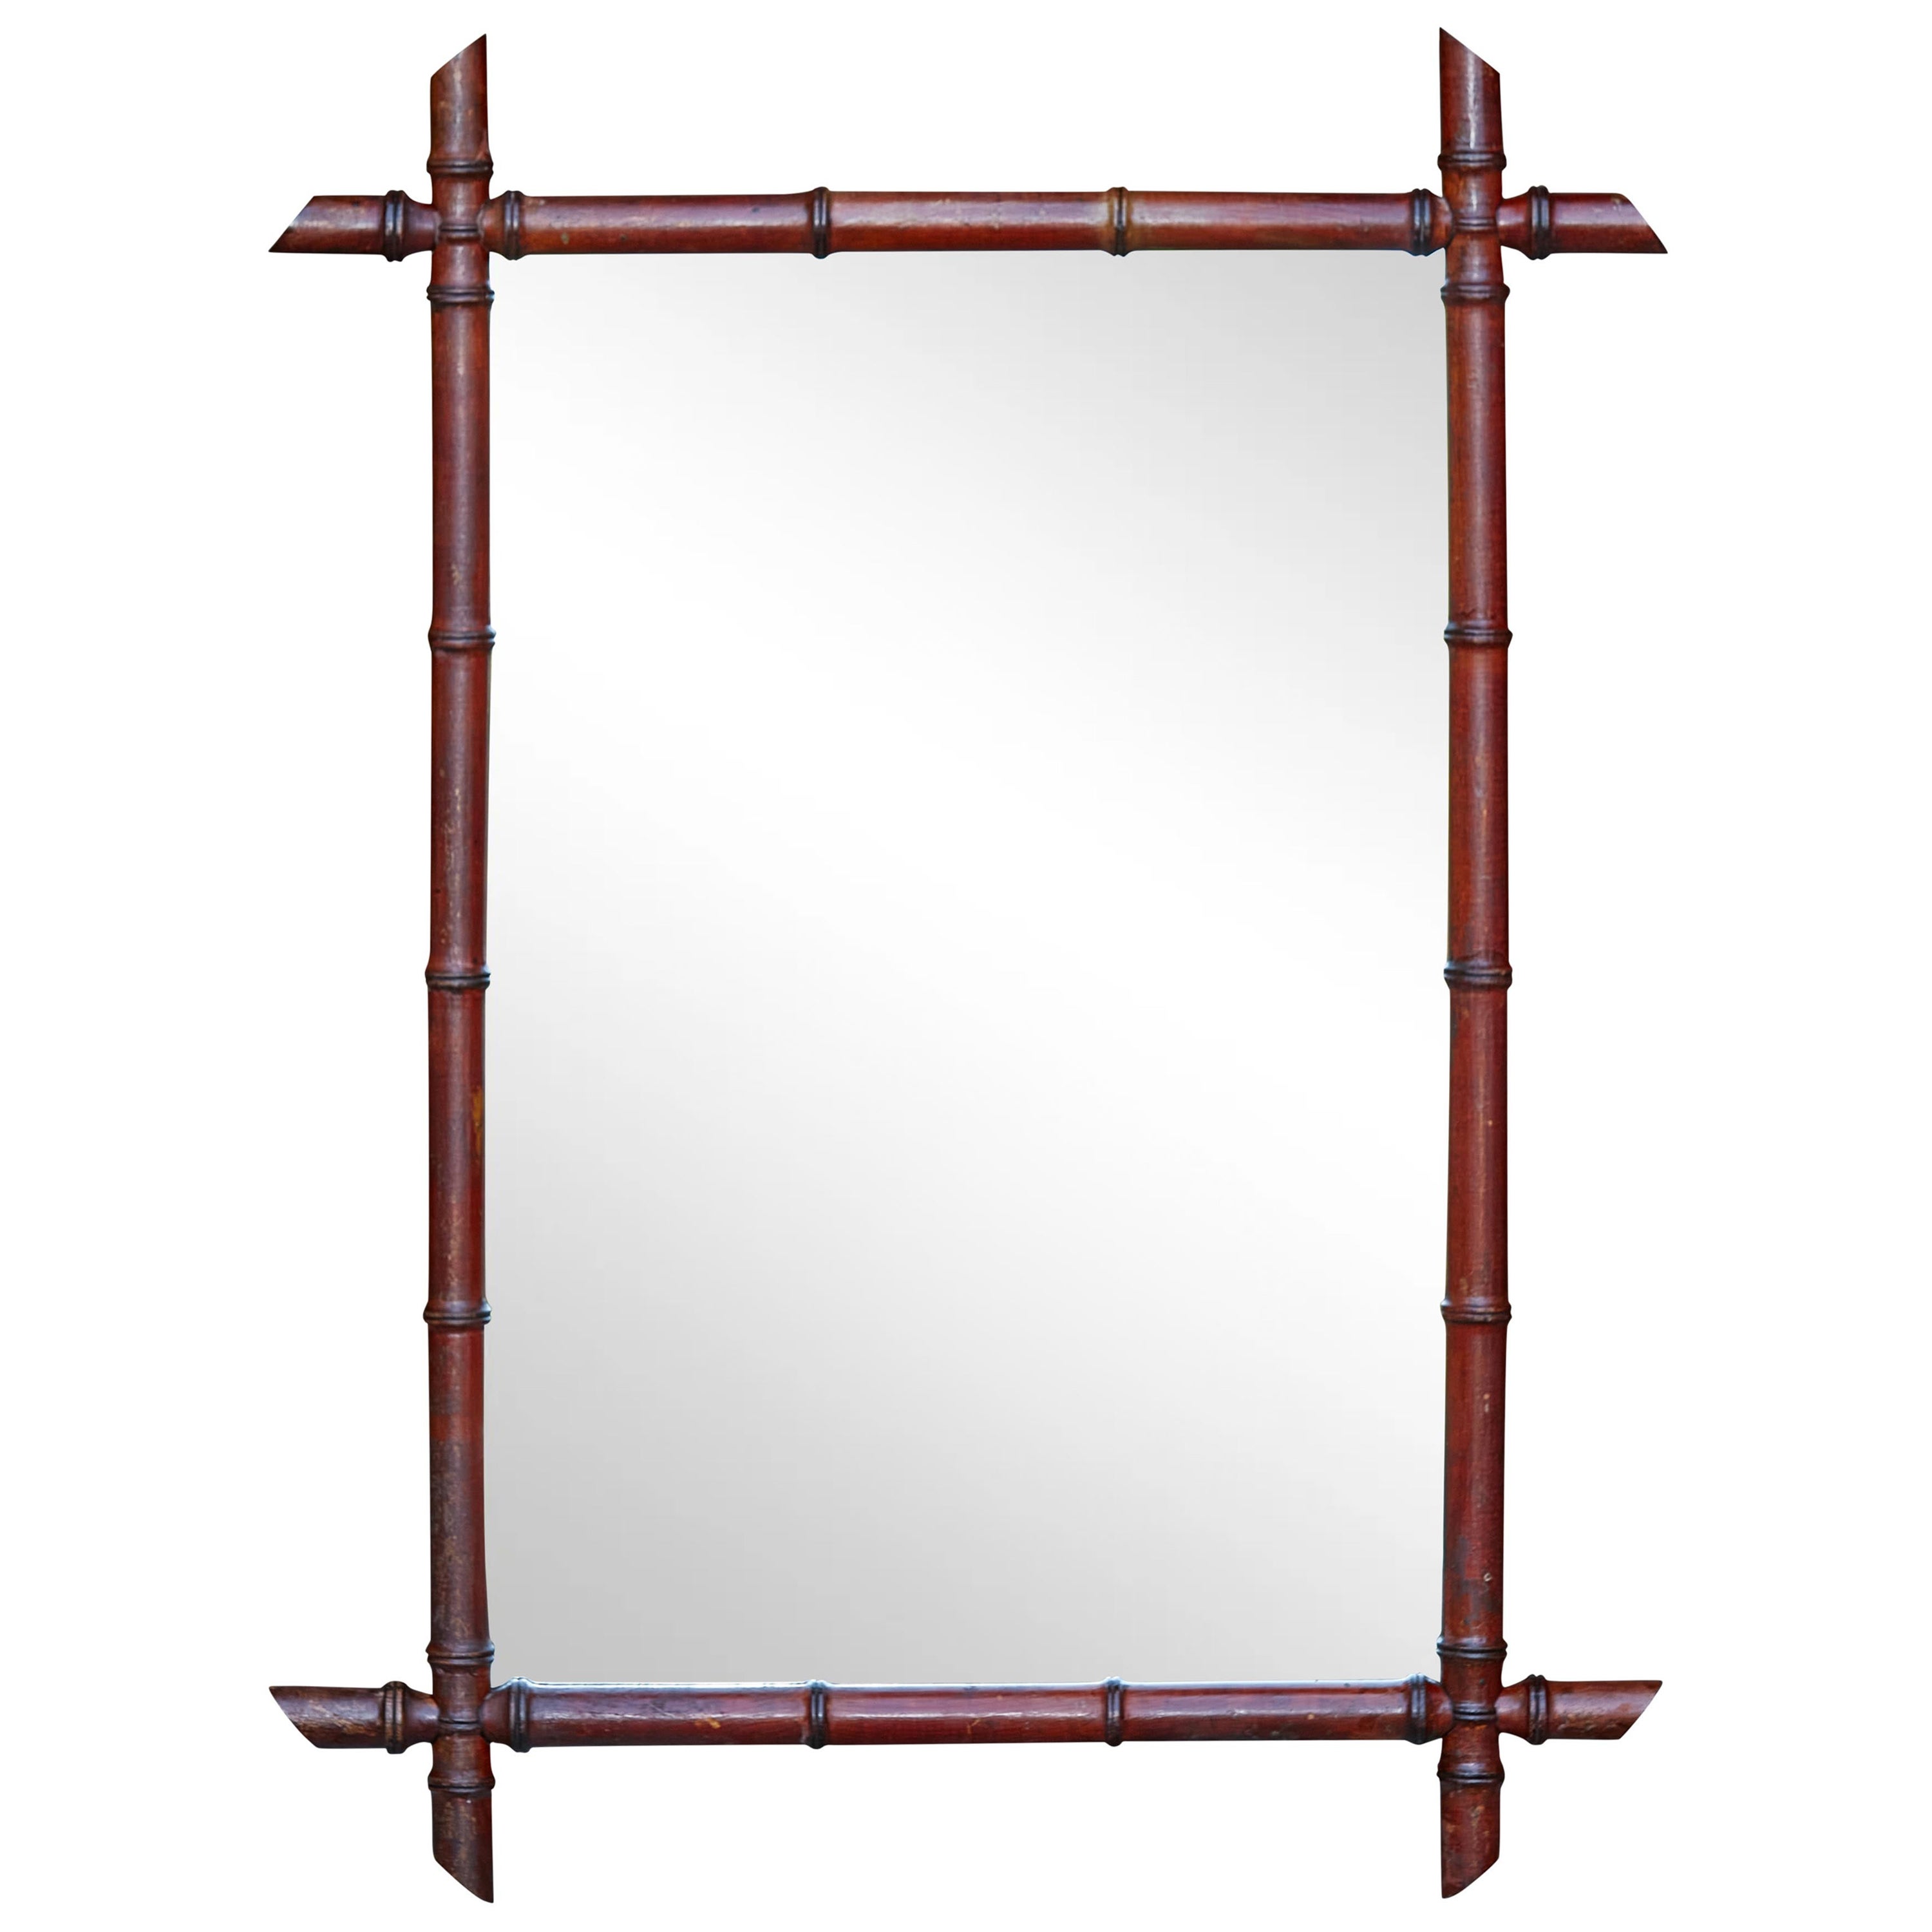 French Turn of the Century Faux Bamboo Mirror with Slanted Accents, circa 1900